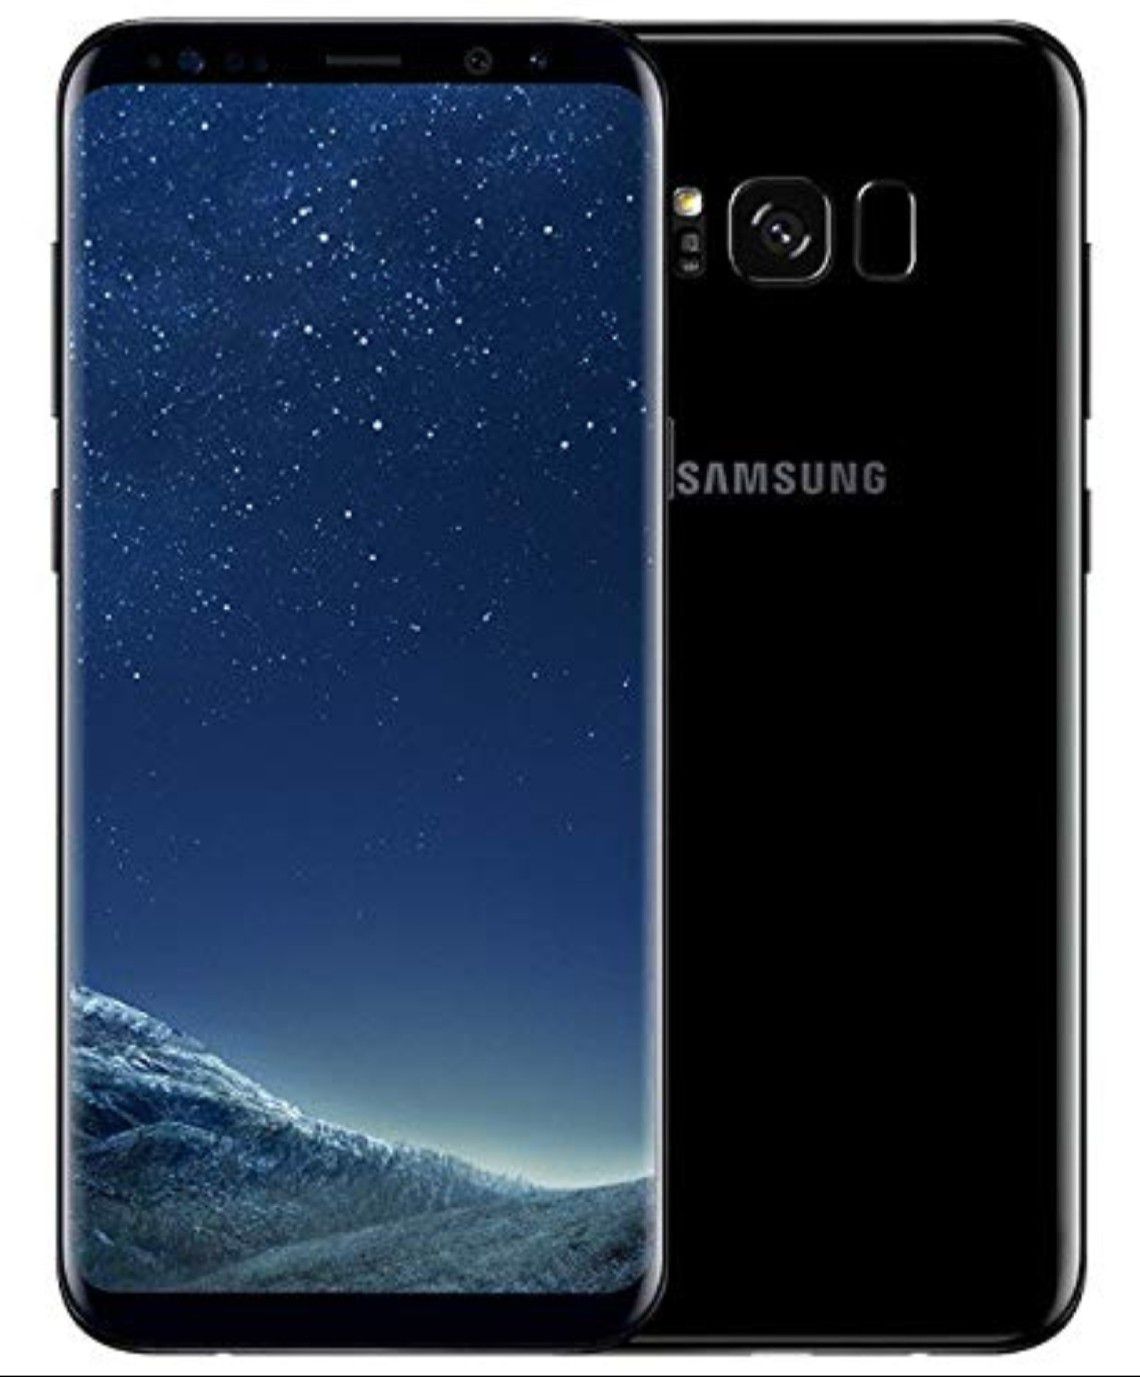 Samsung Galaxy S8 64gb (blk) TRADE for iPhone